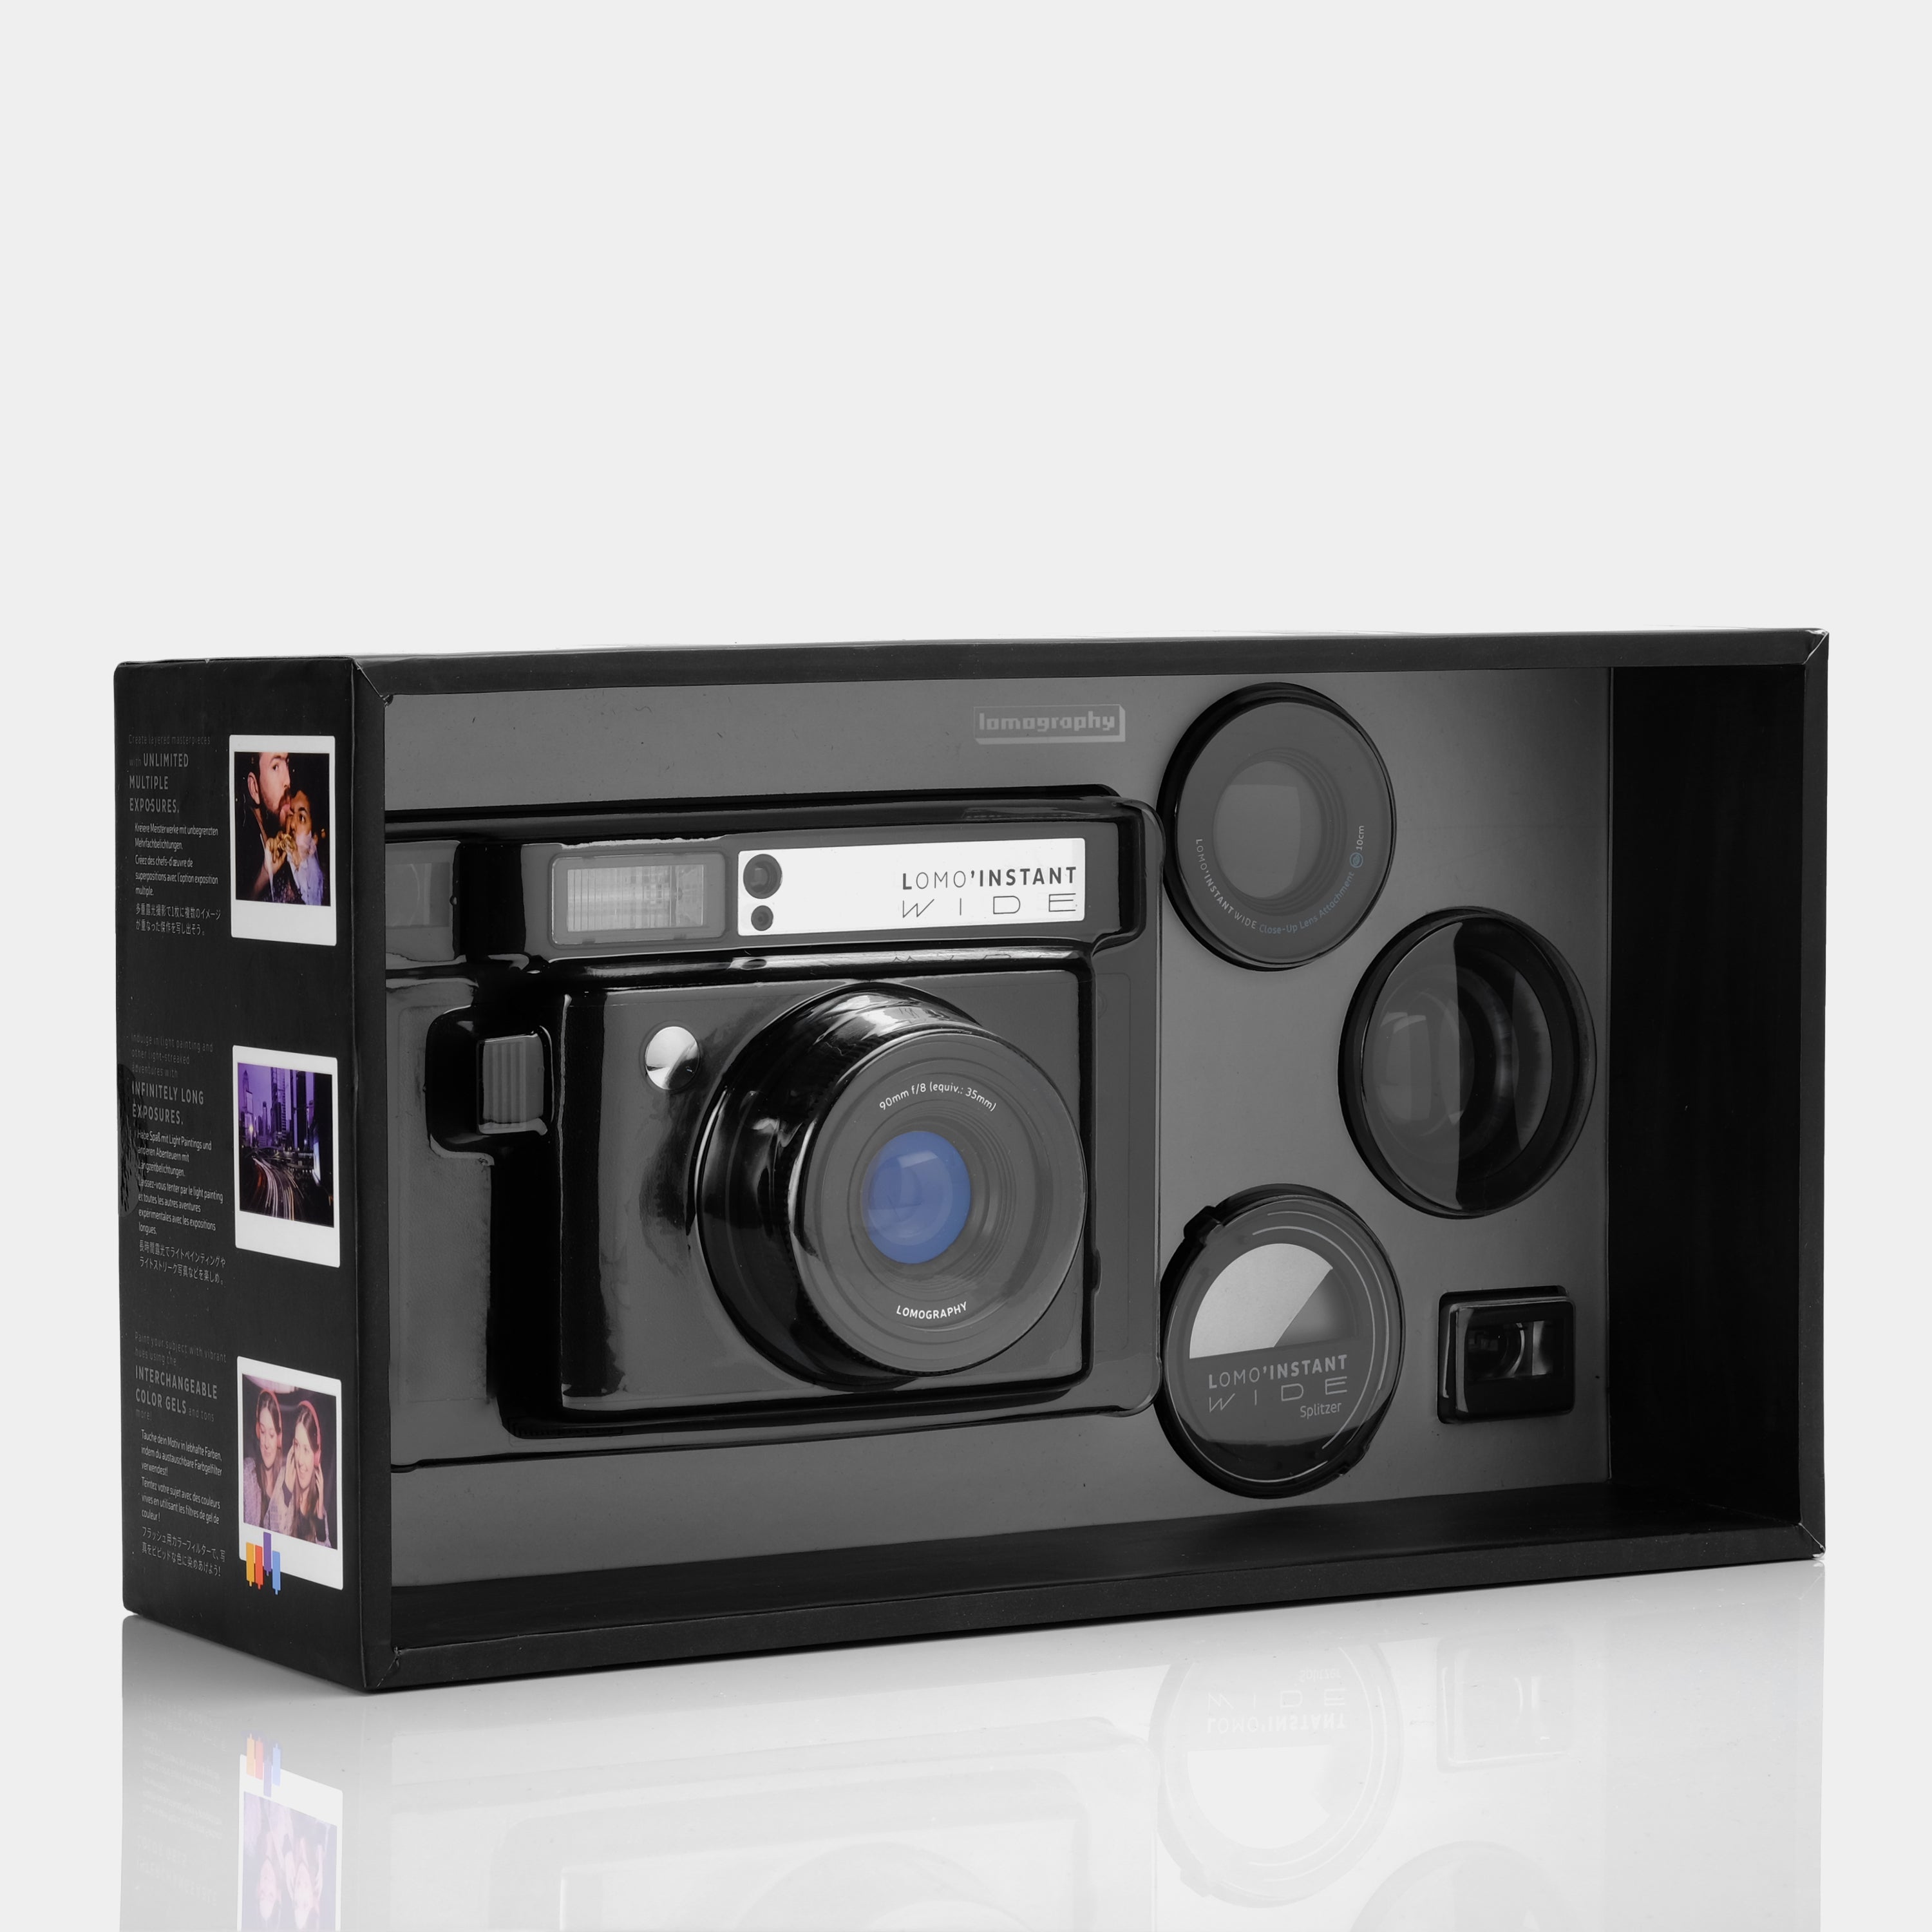 Lomography Lomo'Instant Wide Instax Instant Film Camera and Lenses Combo (Open-Box)